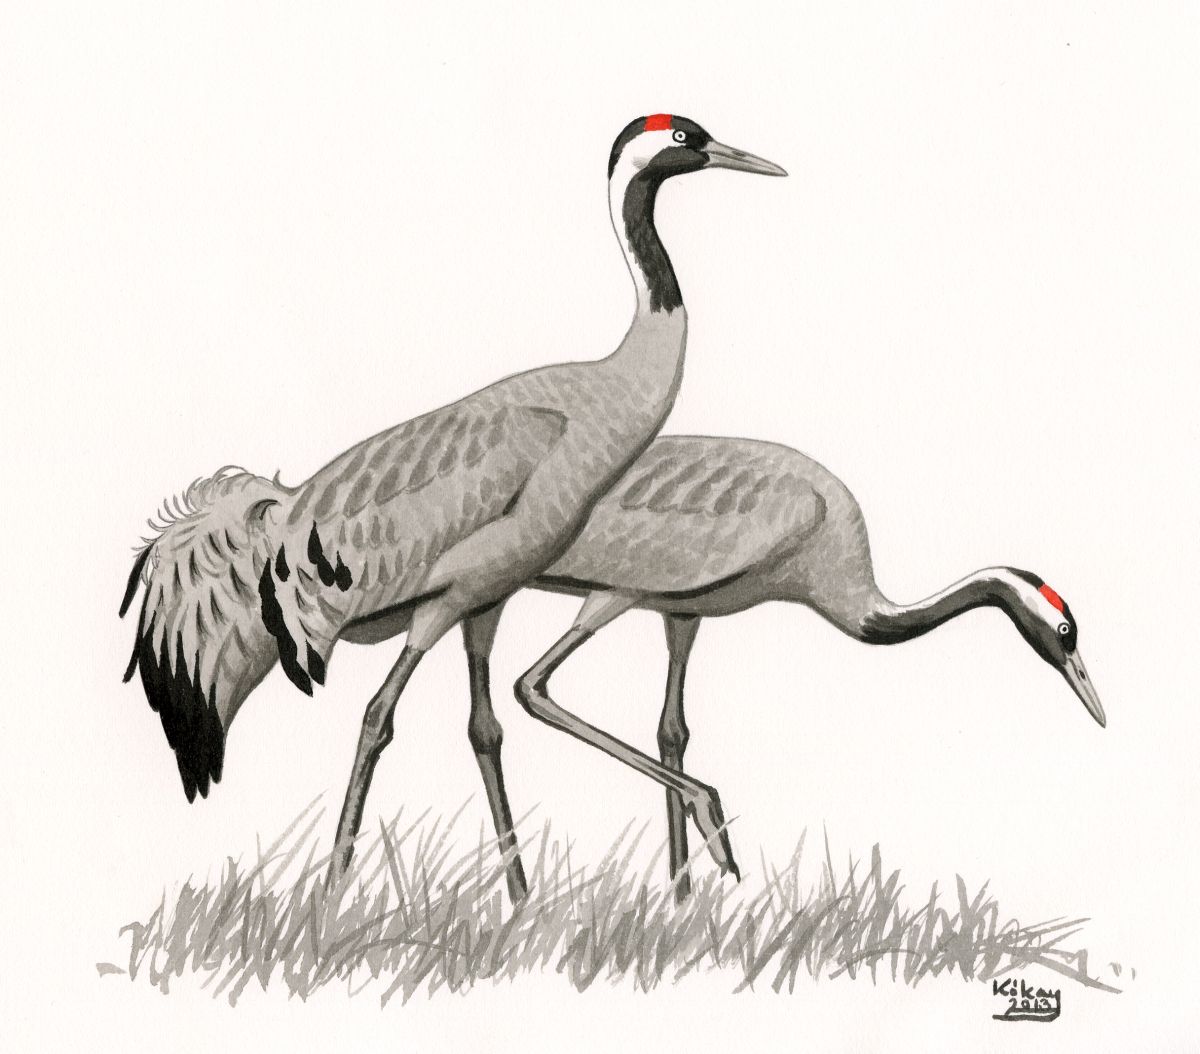 Common Crane pair (Grus grus), ink and watercolour on paper